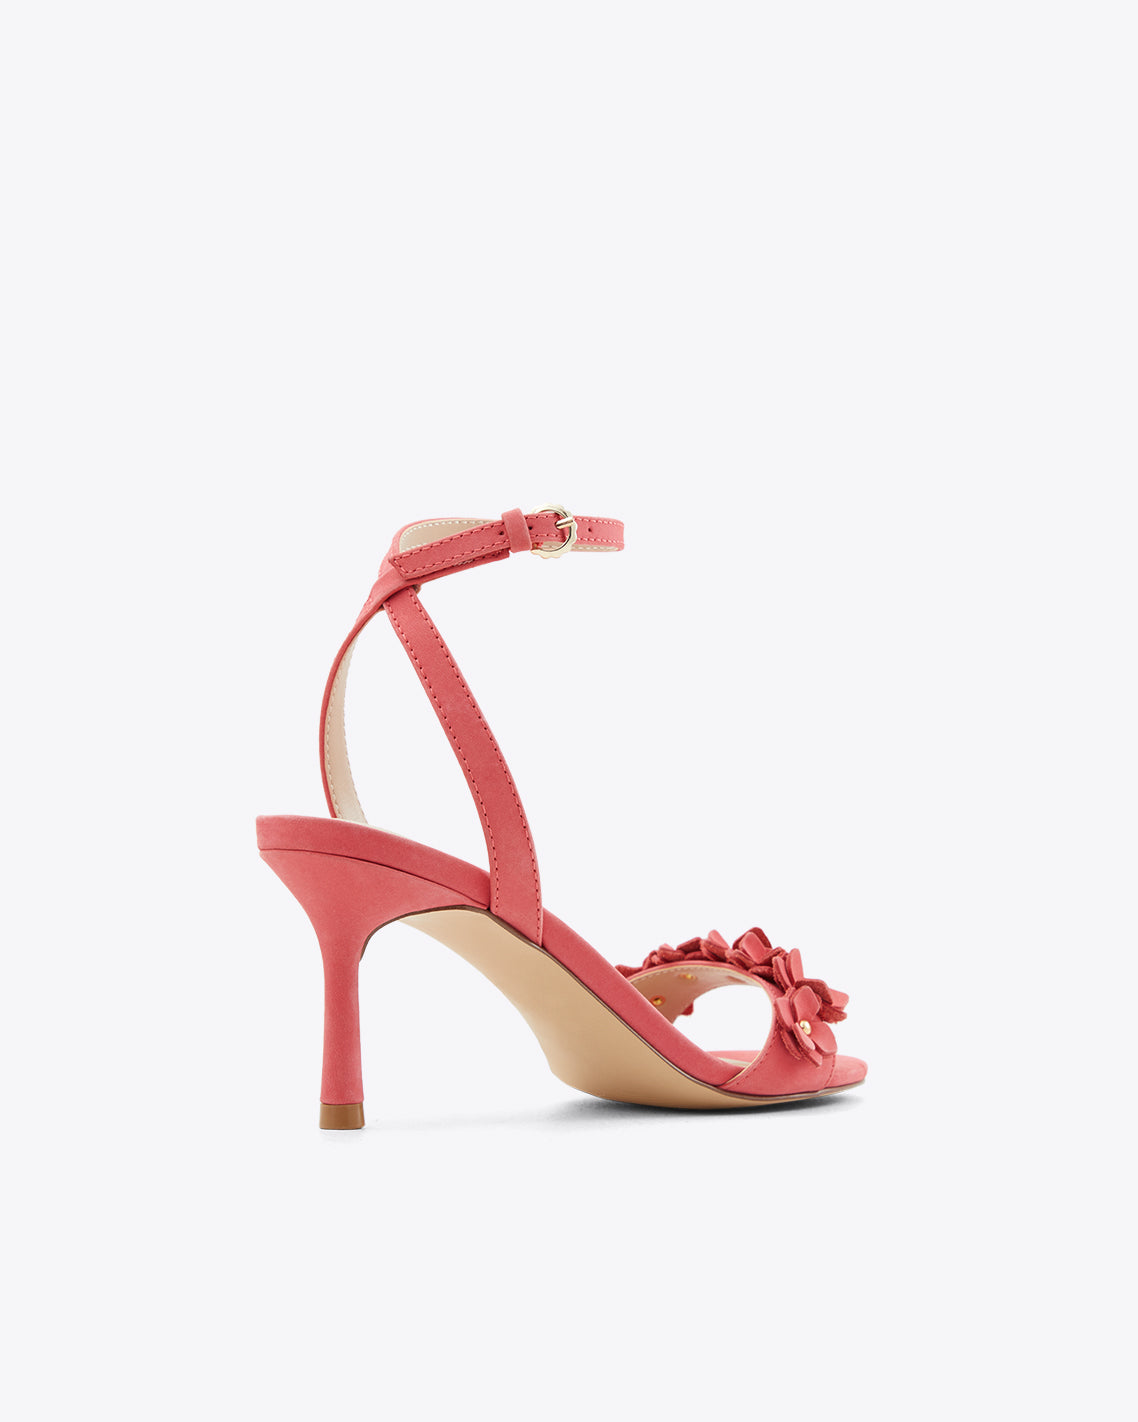 Floral Alice Ankle Strap Heels in Raspberry Pink